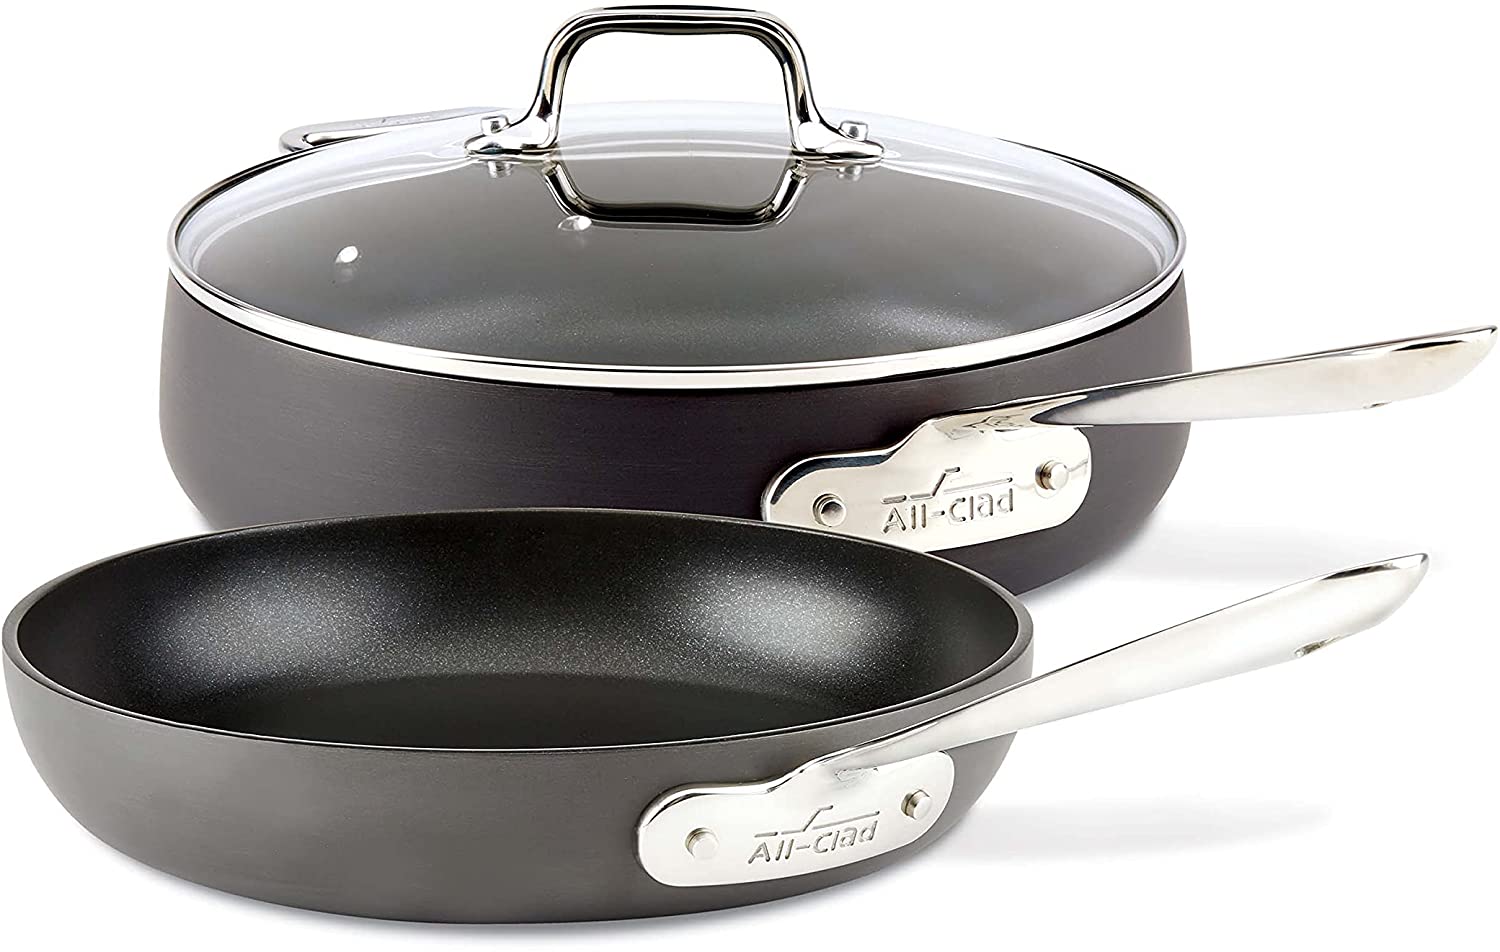 All-Clad HA1 Nonstick Hard Anodized Fry Saute Pan